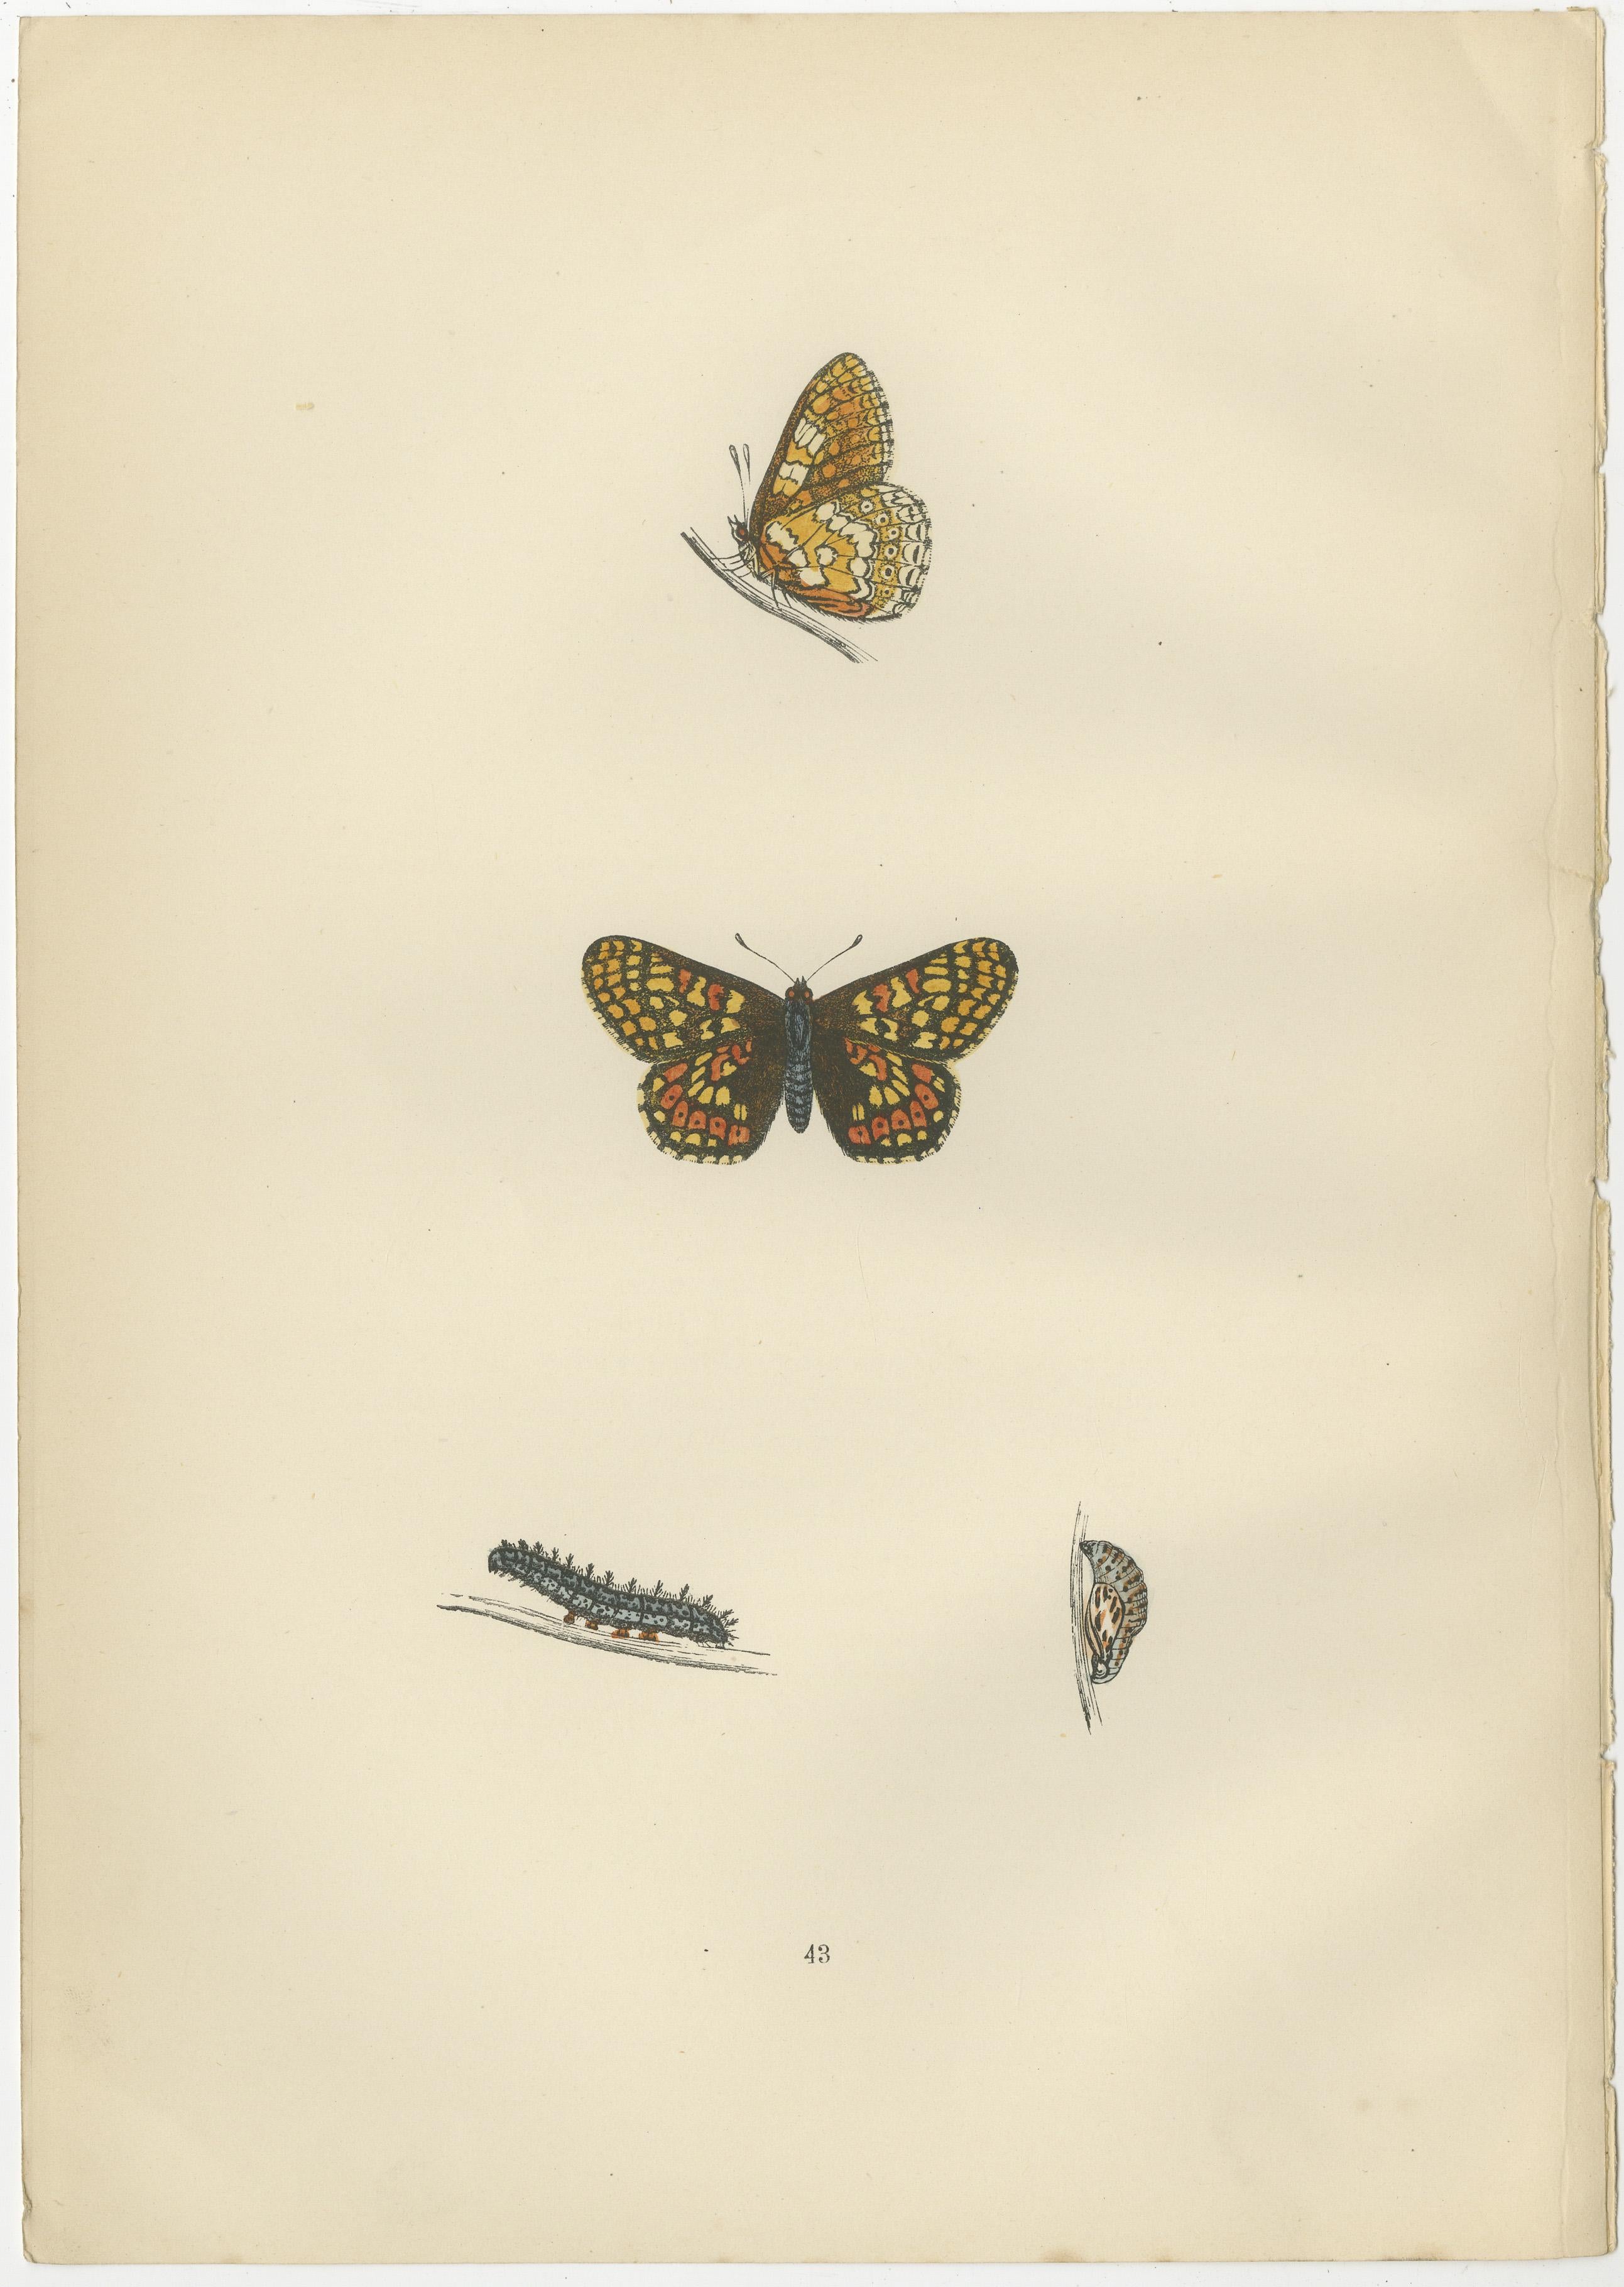 The butterflies depicted in these plates, the Greasy Fritillary, Glanville Fritillary, and Pearl-Bordered Fritillary, are all members of the Fritillary subgroup, which is part of the Nymphalidae family. They are known for their distinctive checkered